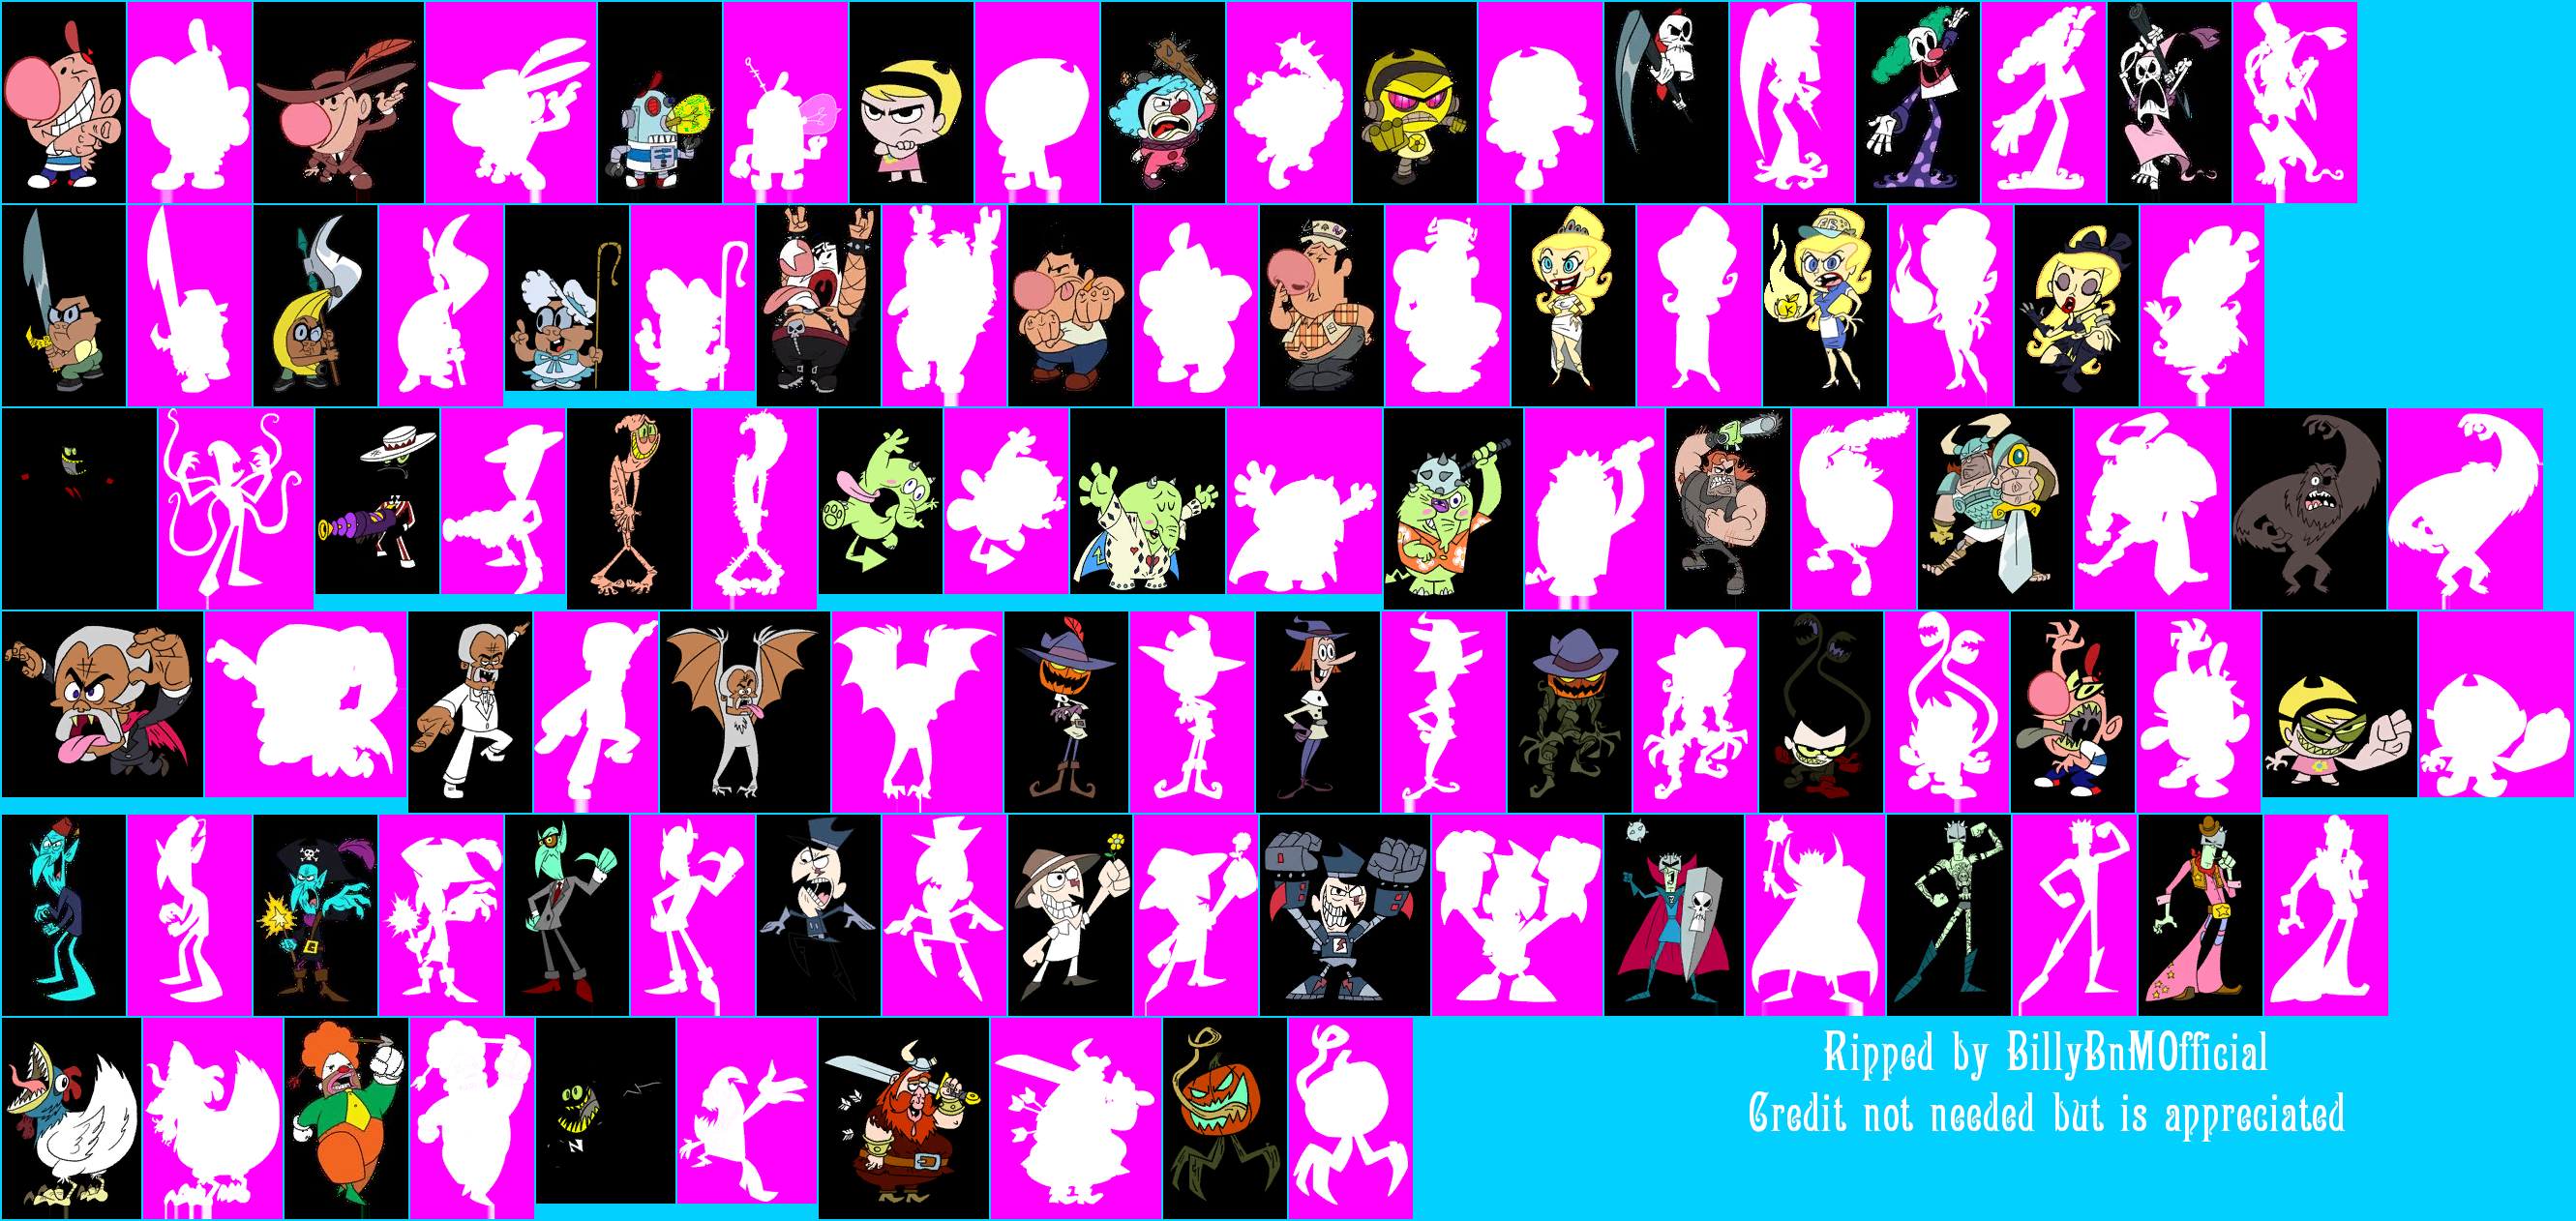 The Grim Adventures of Billy & Mandy - Character Select Portraits